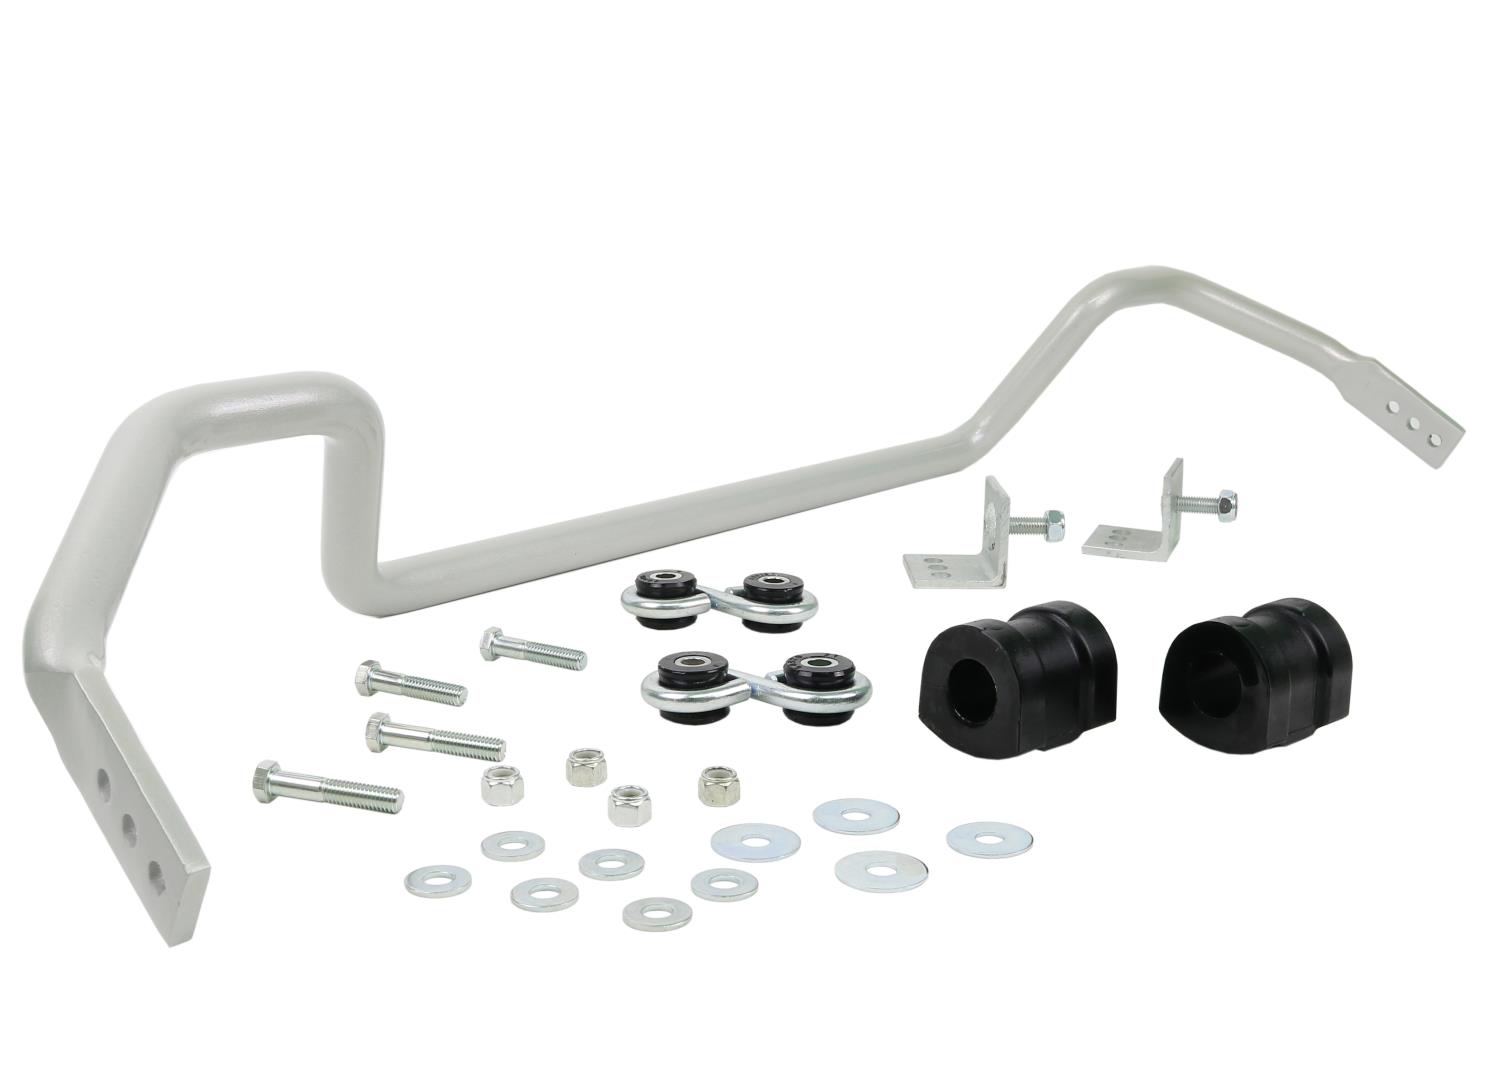 BBF39Z Front Heavy Duty Adjustable 27 mm Sway Bar for 1995-2000 BMW 3 Series E36, 316i, 318Ti Compact